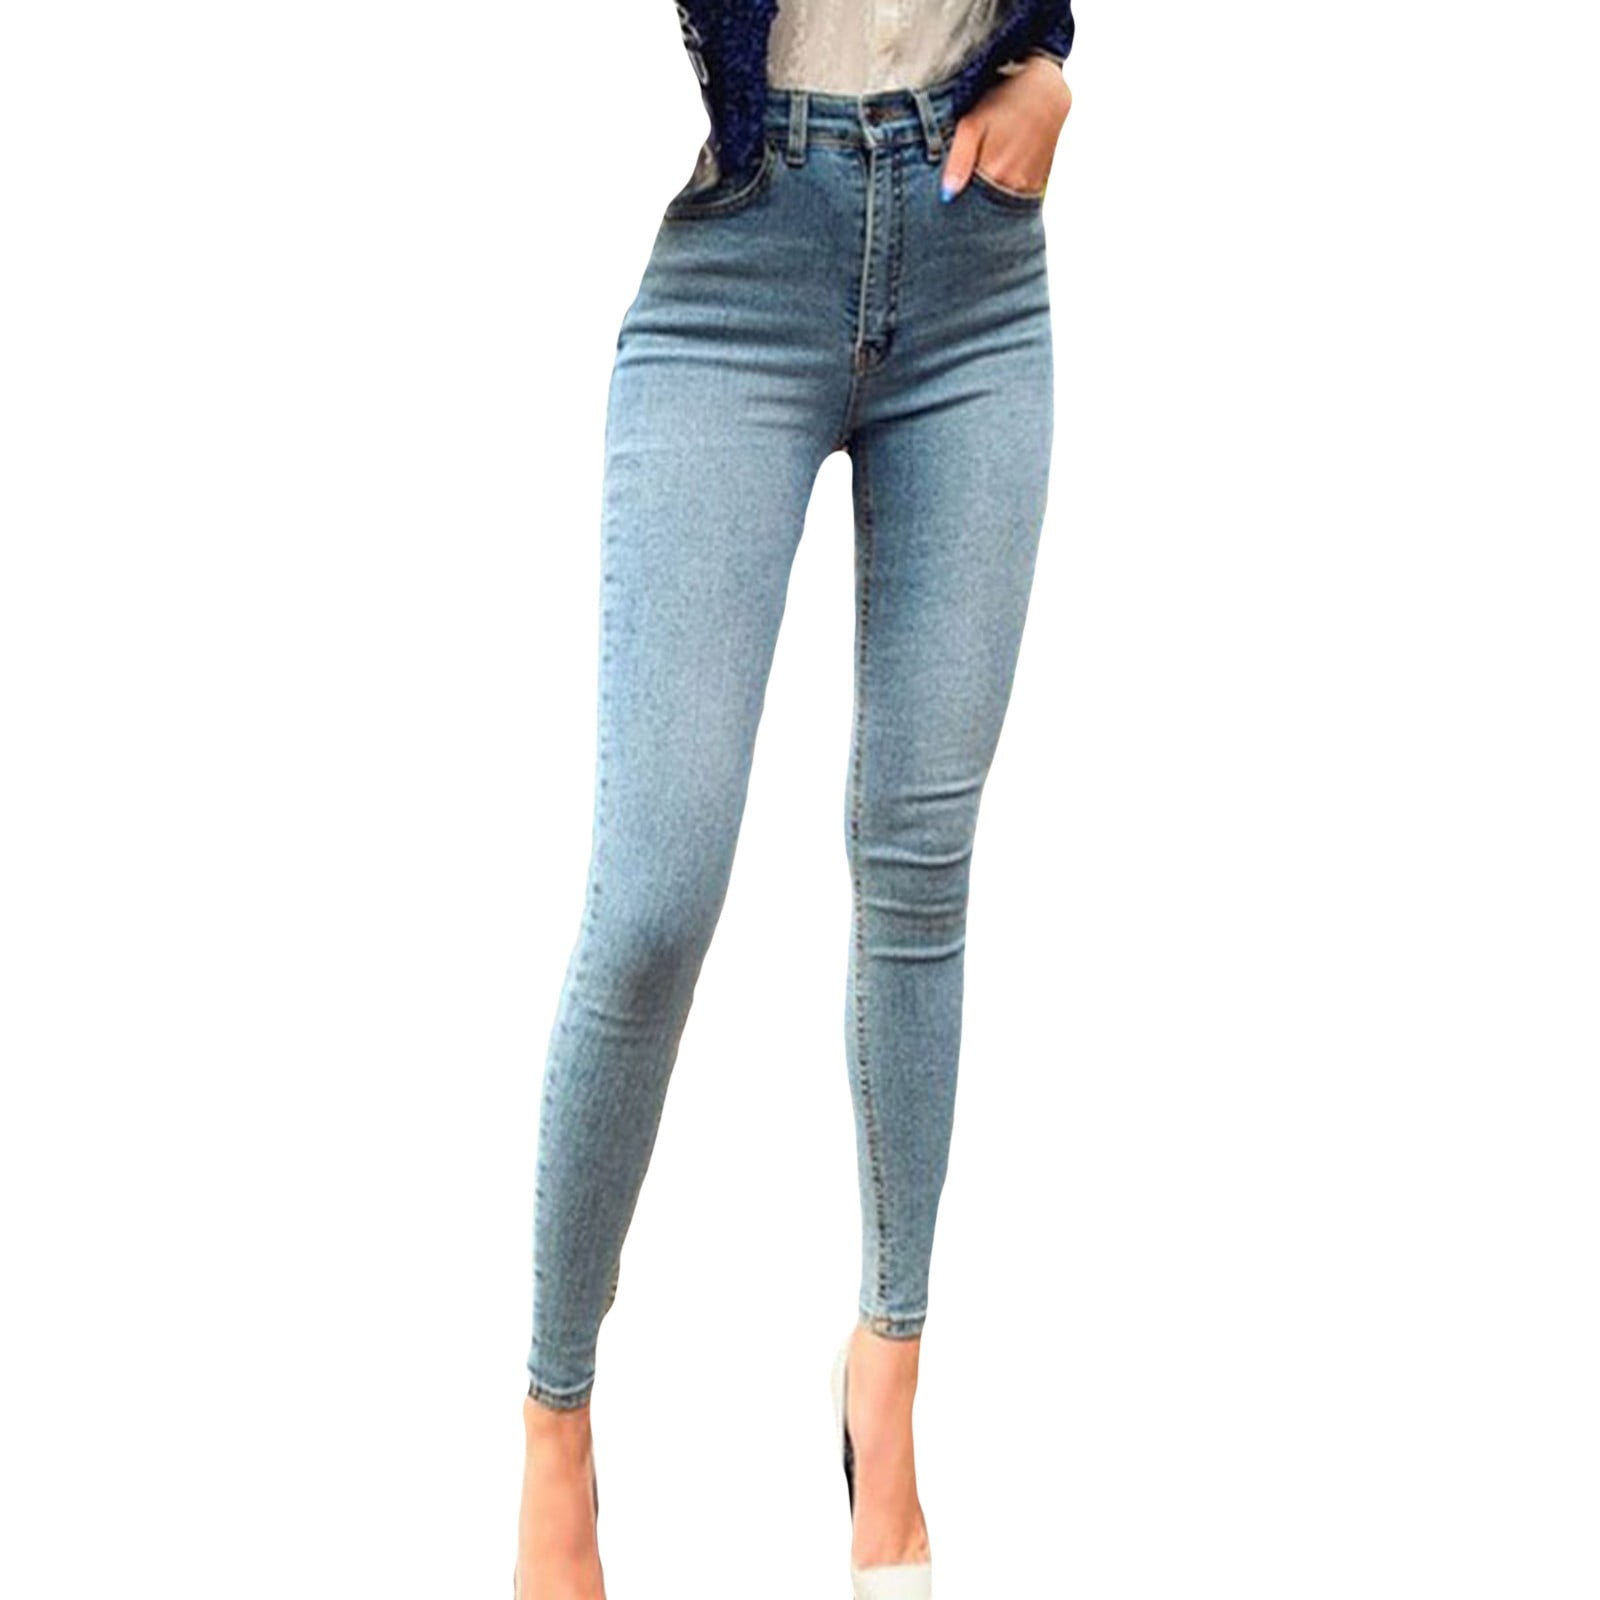  HGps8w Skinny Jeans for Women High Waisted Stretch Slim Fit  Butt Lifting Tight Denim Pants with Pockets : Clothing, Shoes & Jewelry